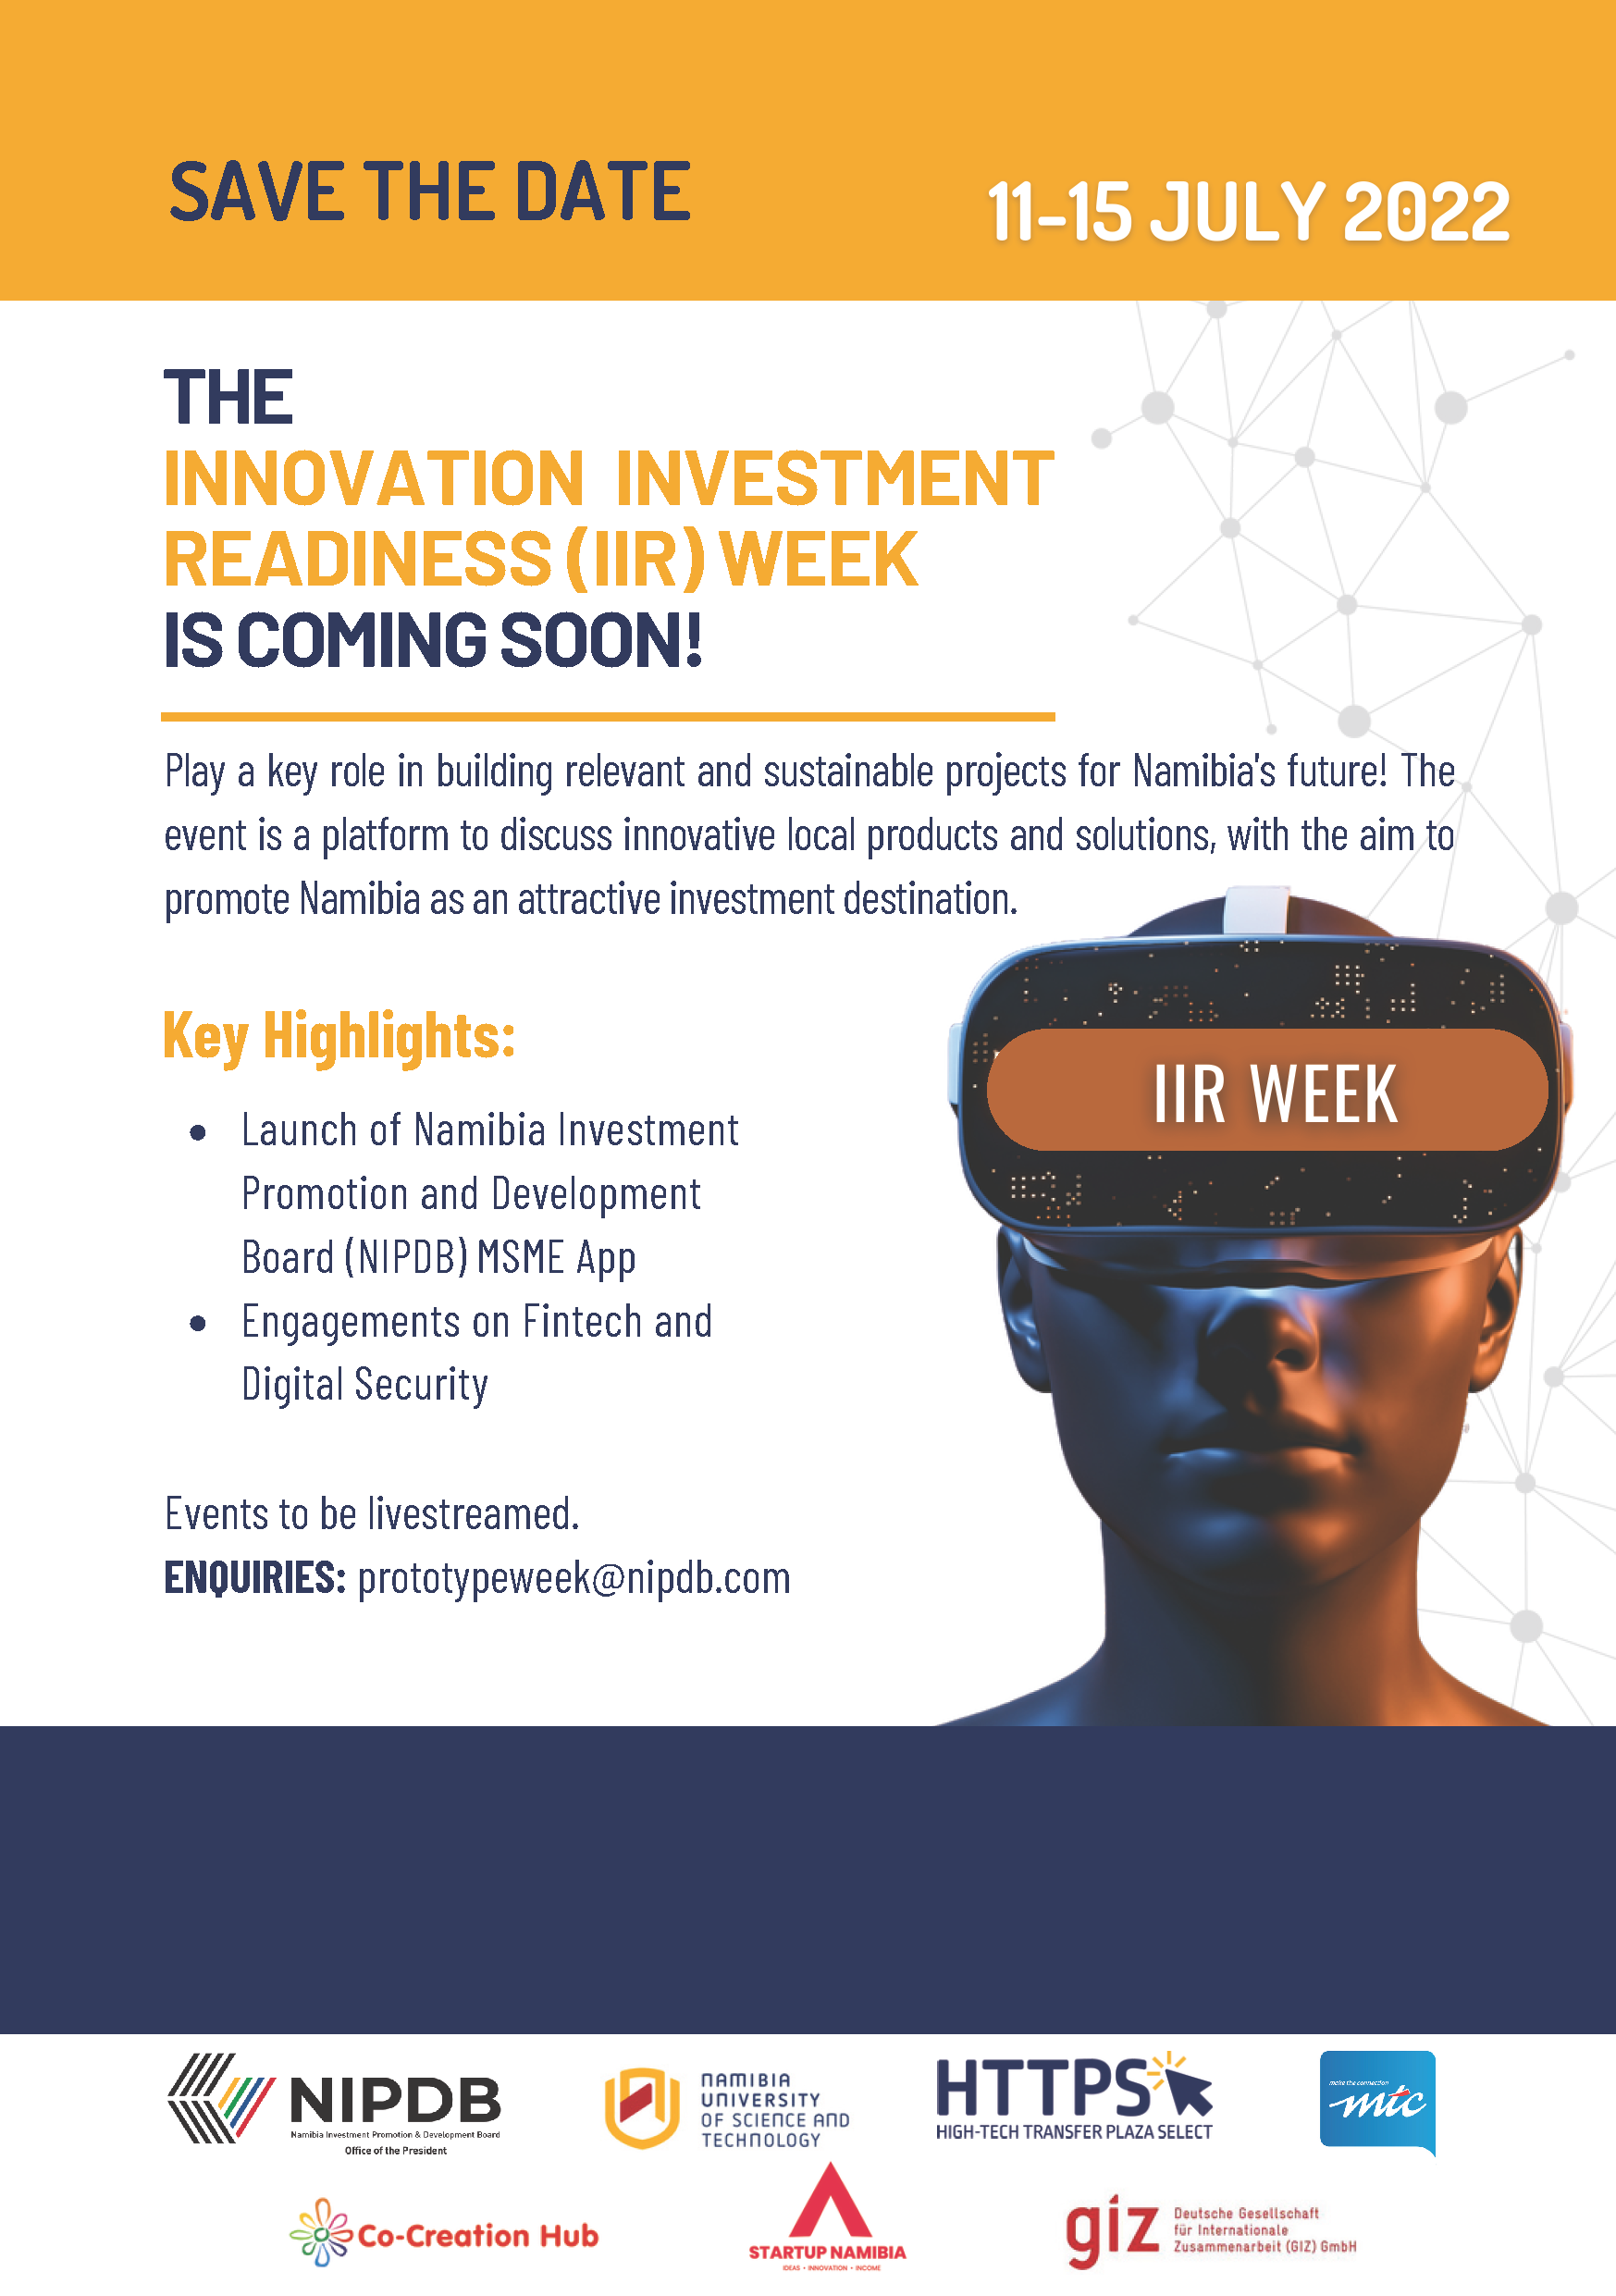 Innovation Investment Readiness Week